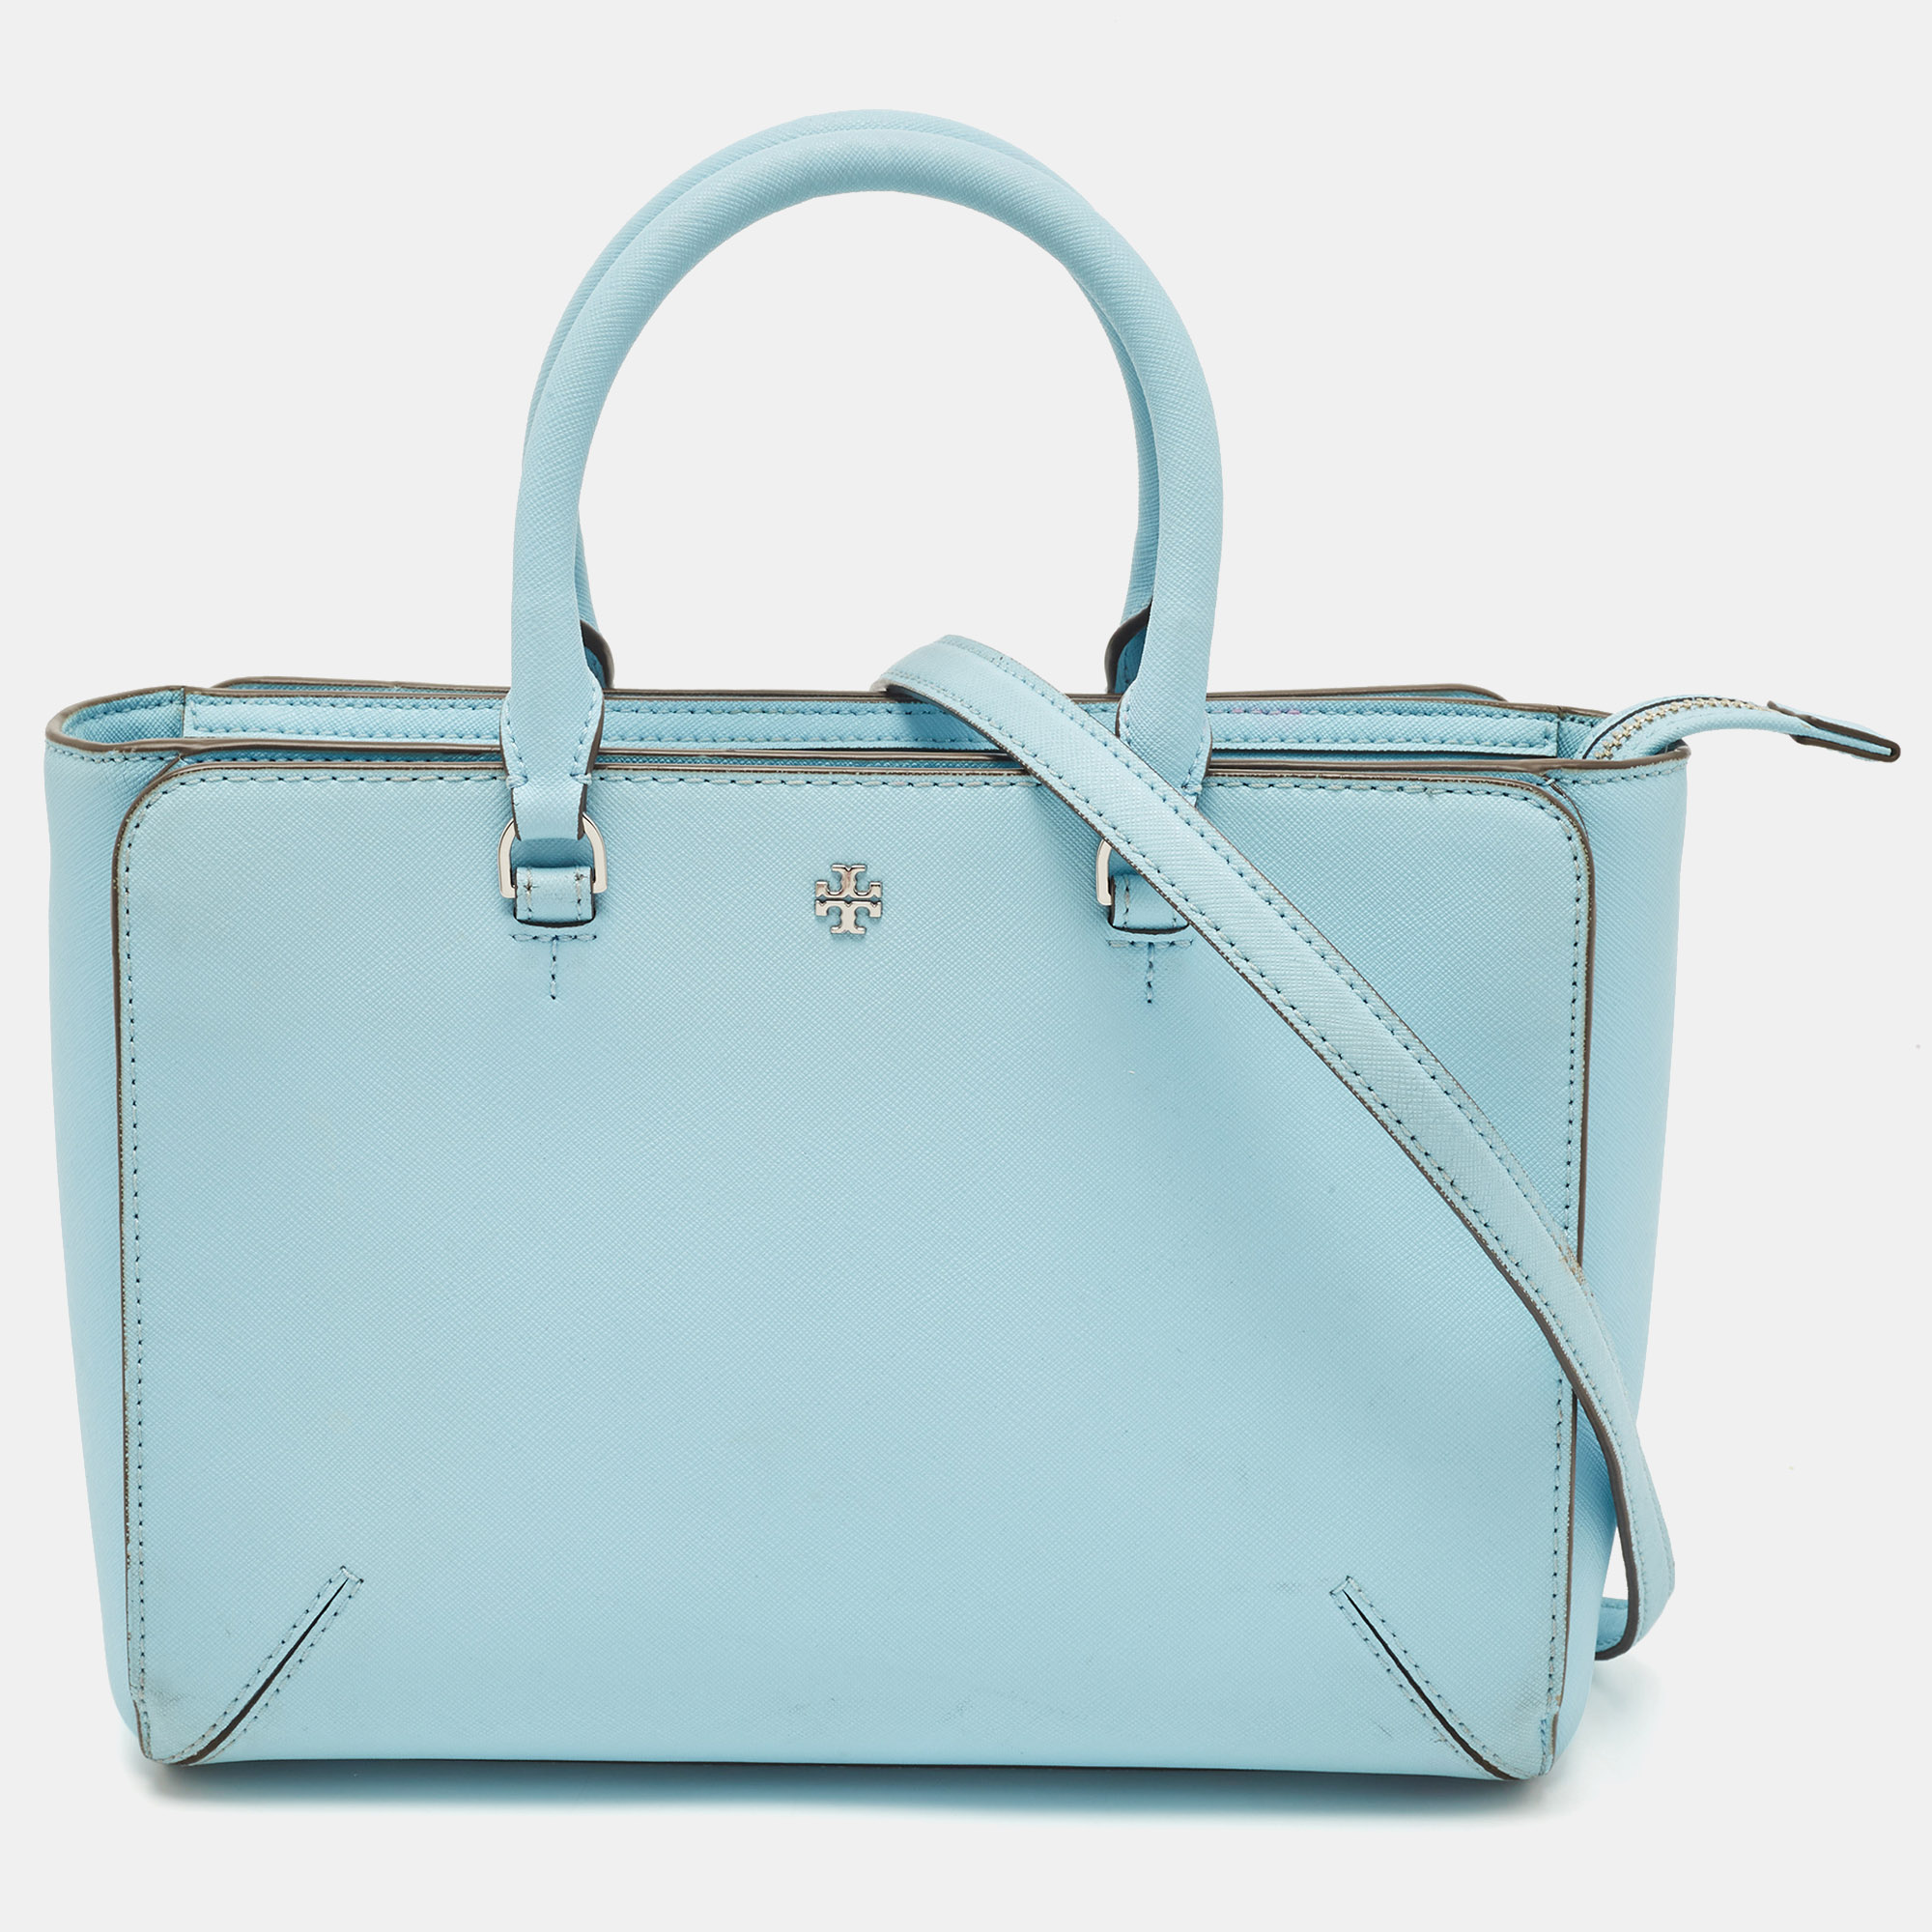 Pre-owned Tory Burch Sky Blue Leather Robinson Tote